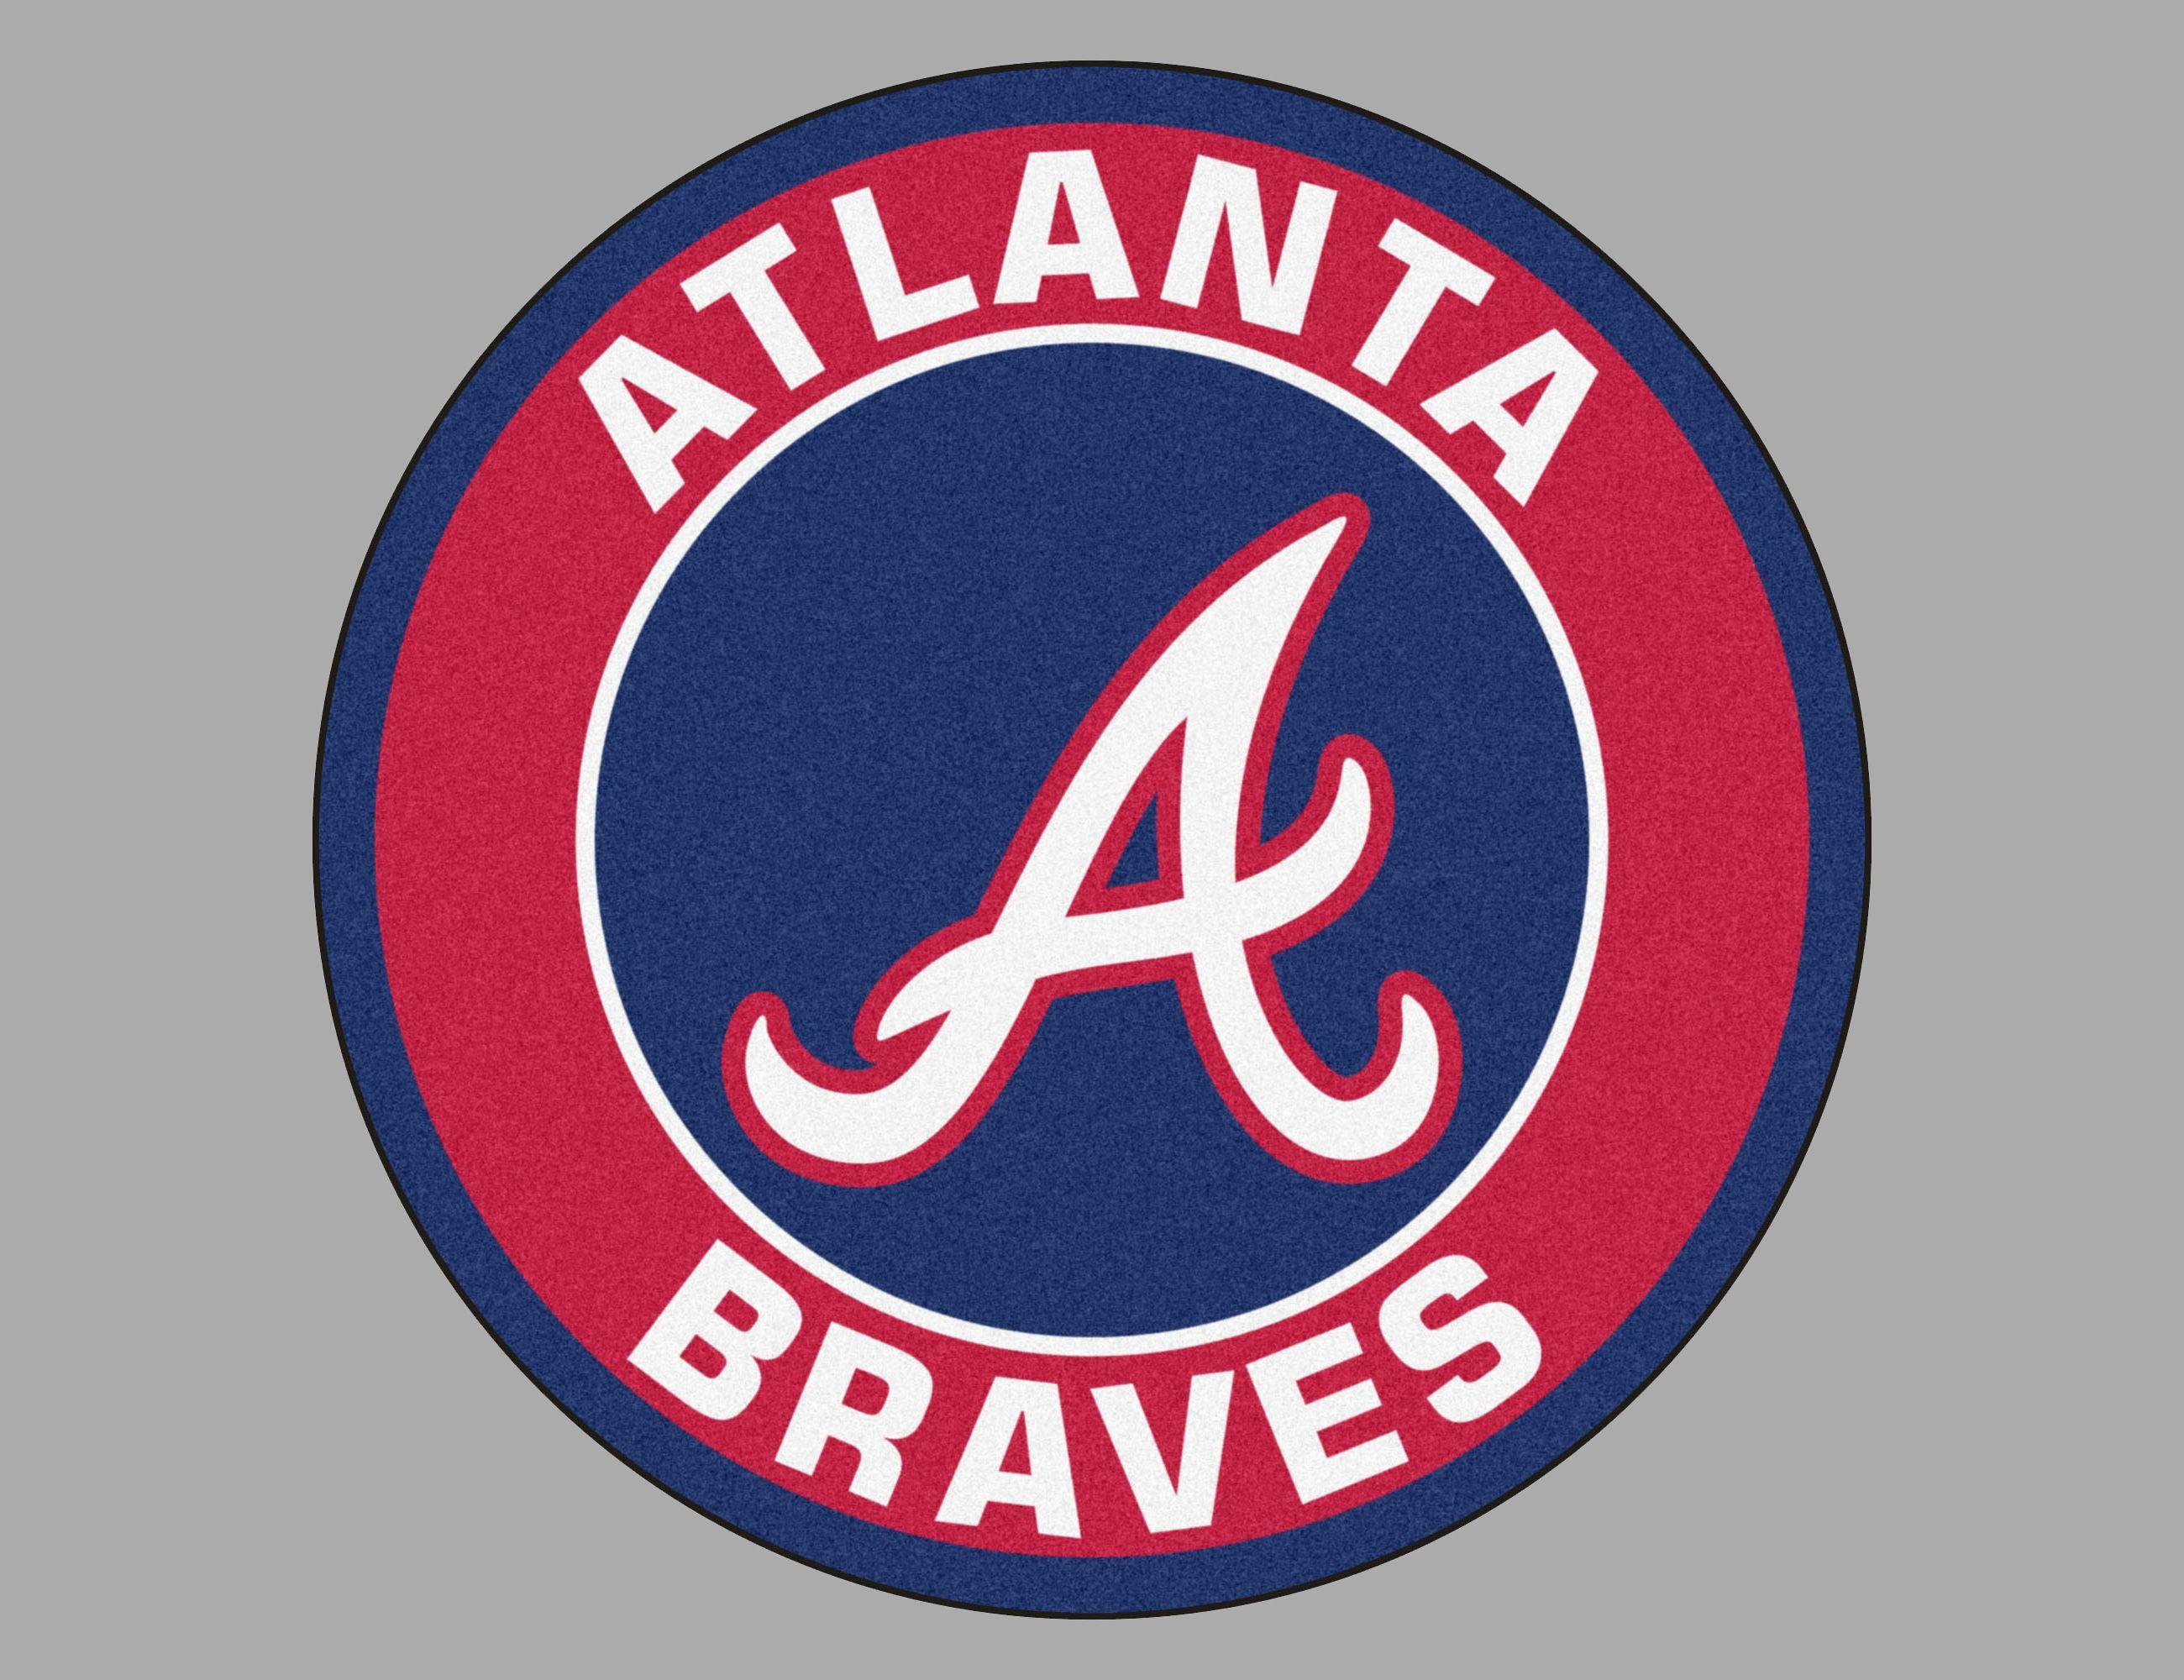 Blue Atlanta Braves Logo - Atlanta Braves Logo, Atlanta Braves Symbol, Meaning, History